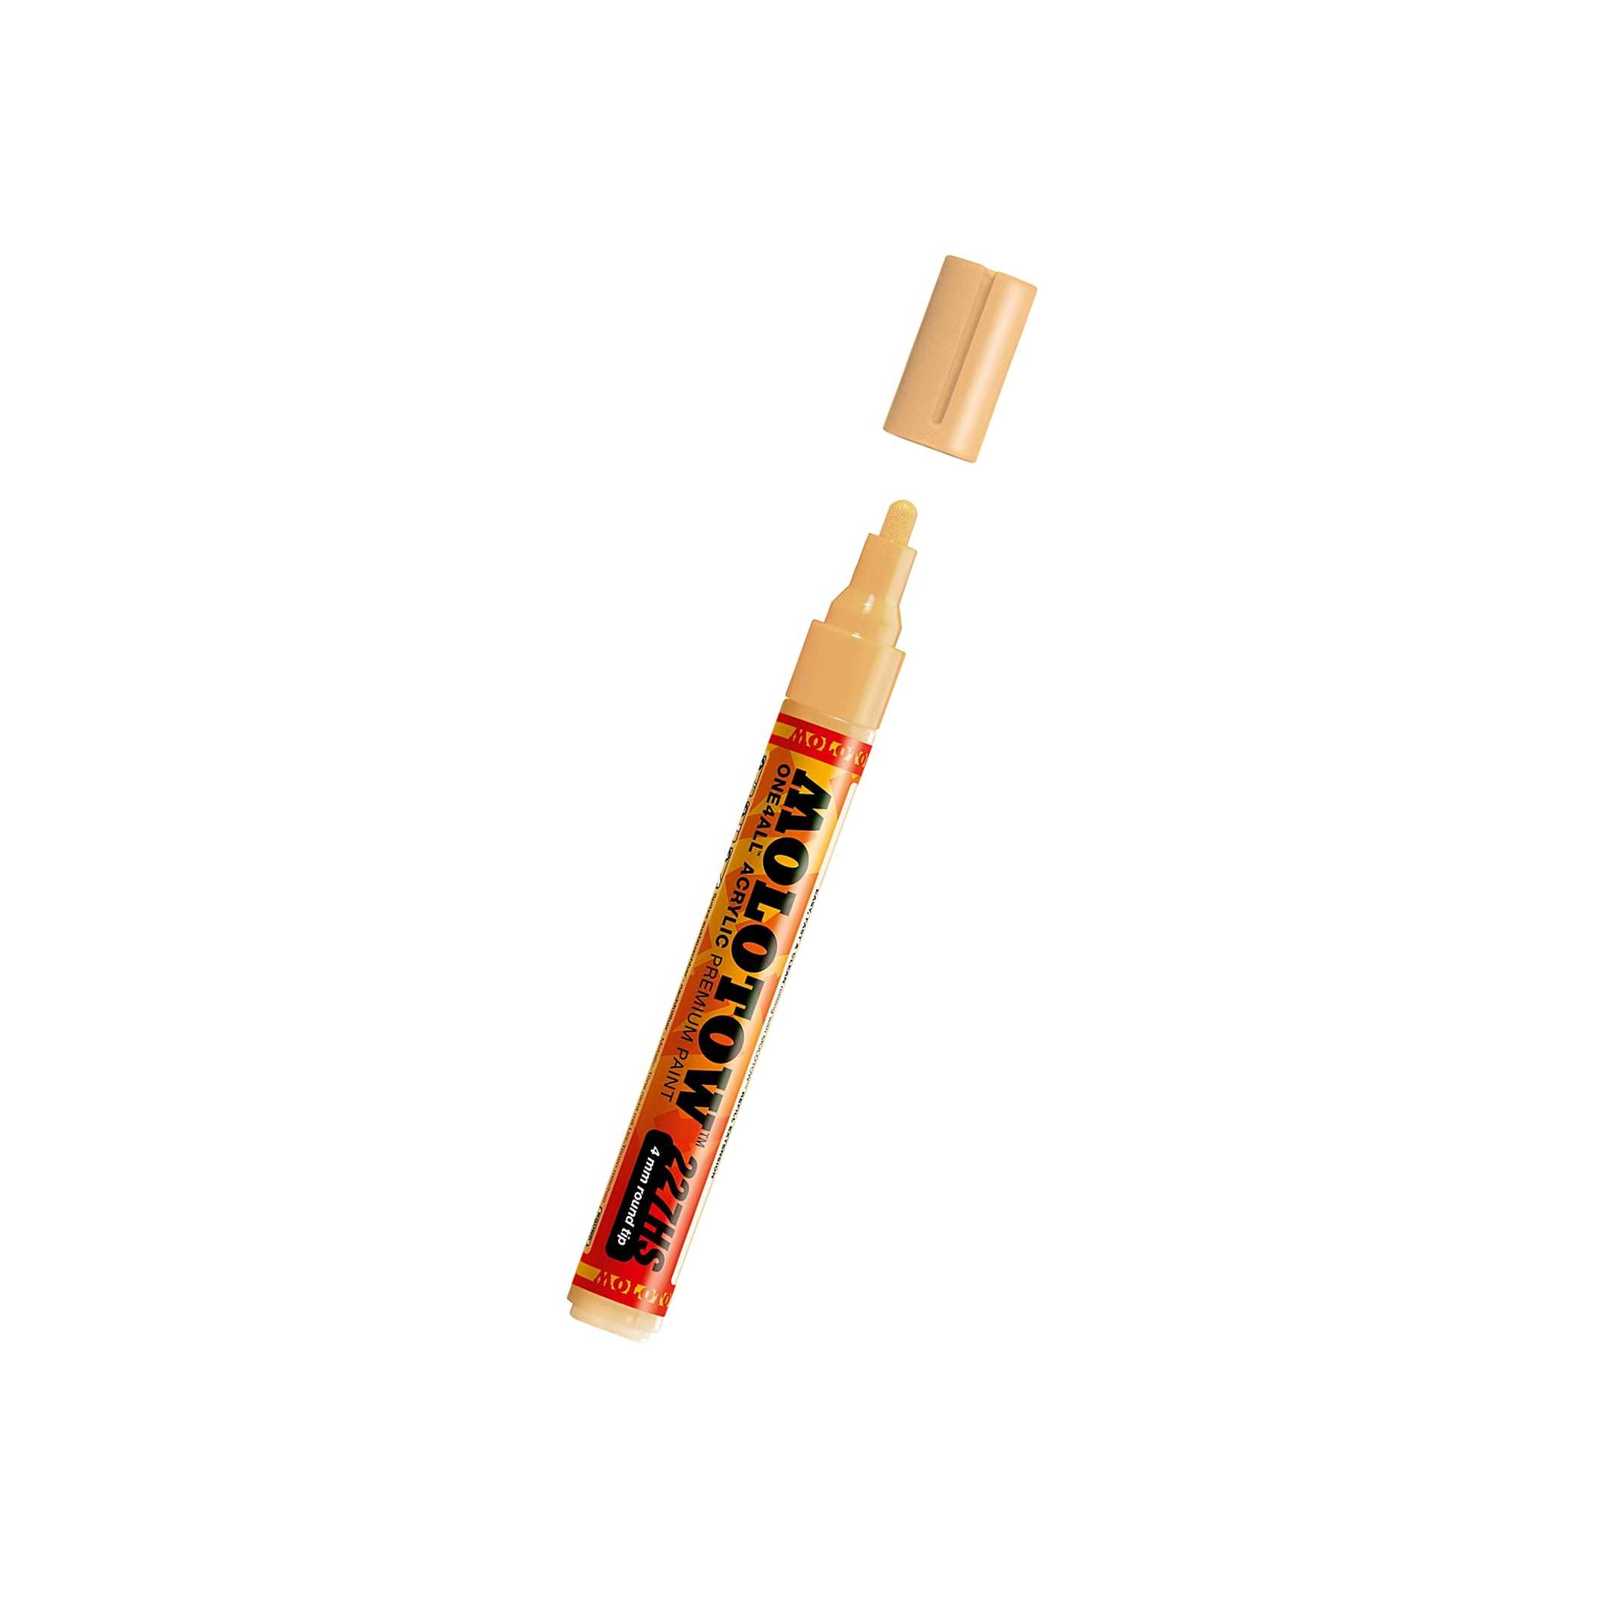 Epdj Products - Molotow one4all acrylic paint marker, 4mm, sahara beige pastel, 1 each 227.22